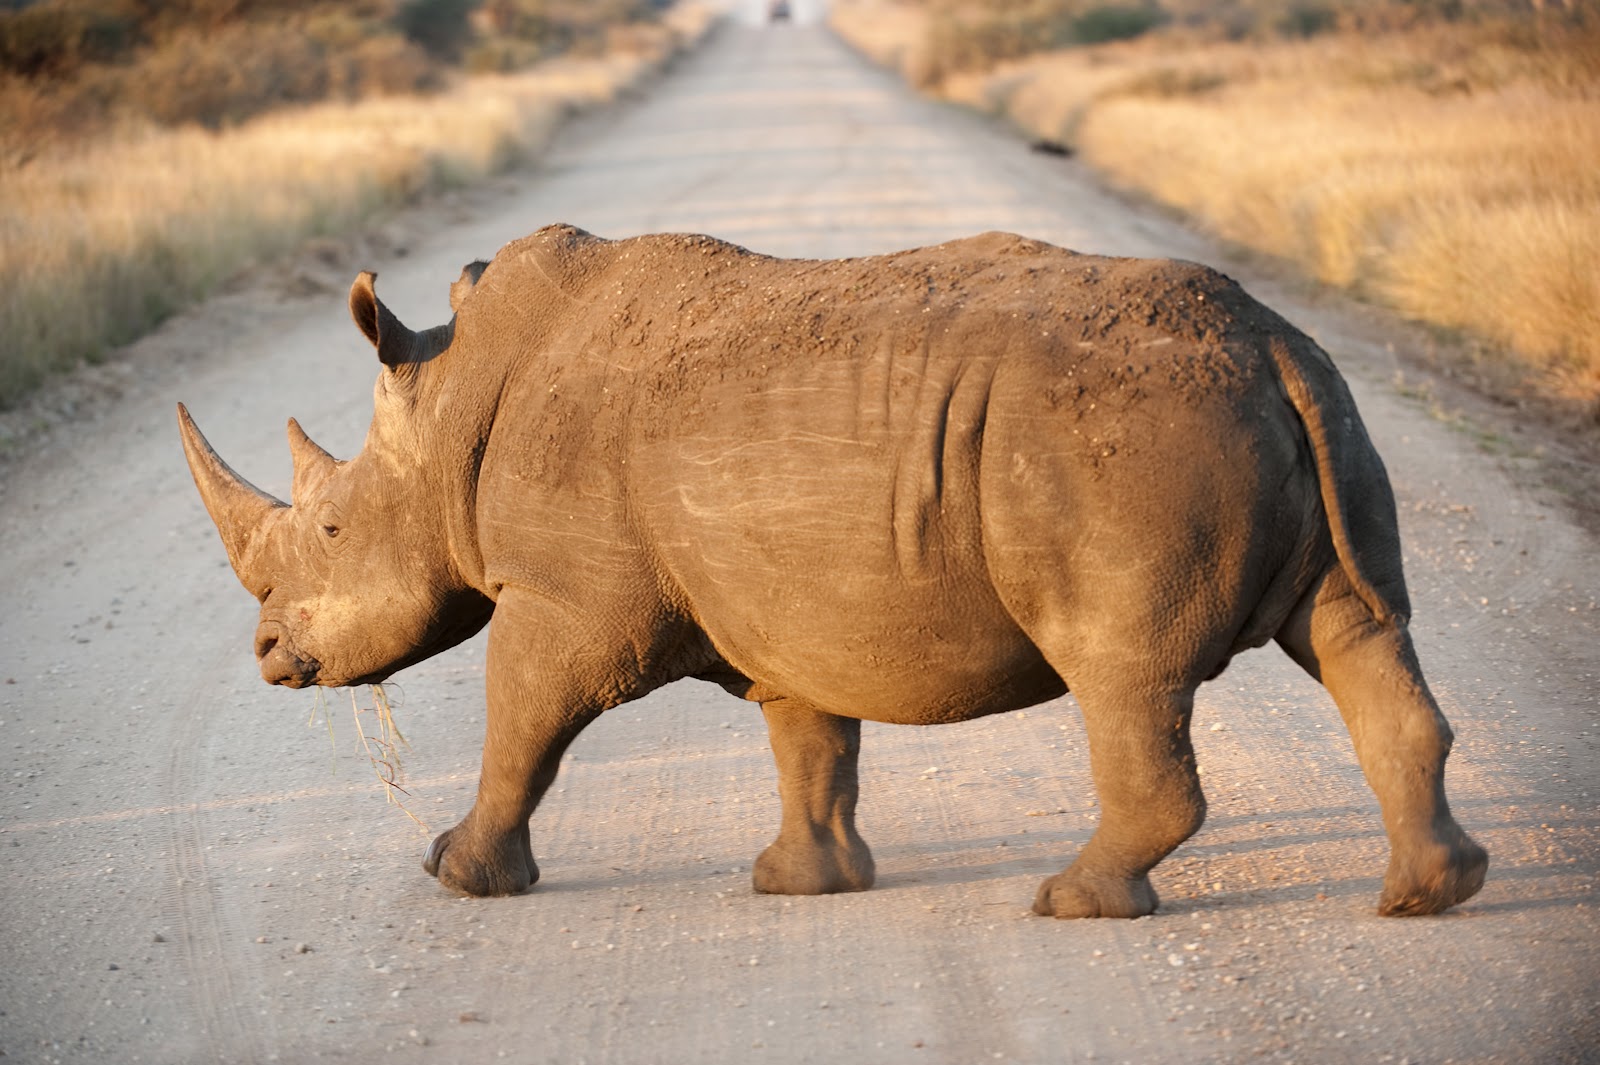 Rhino on road, North West Province, North West Province